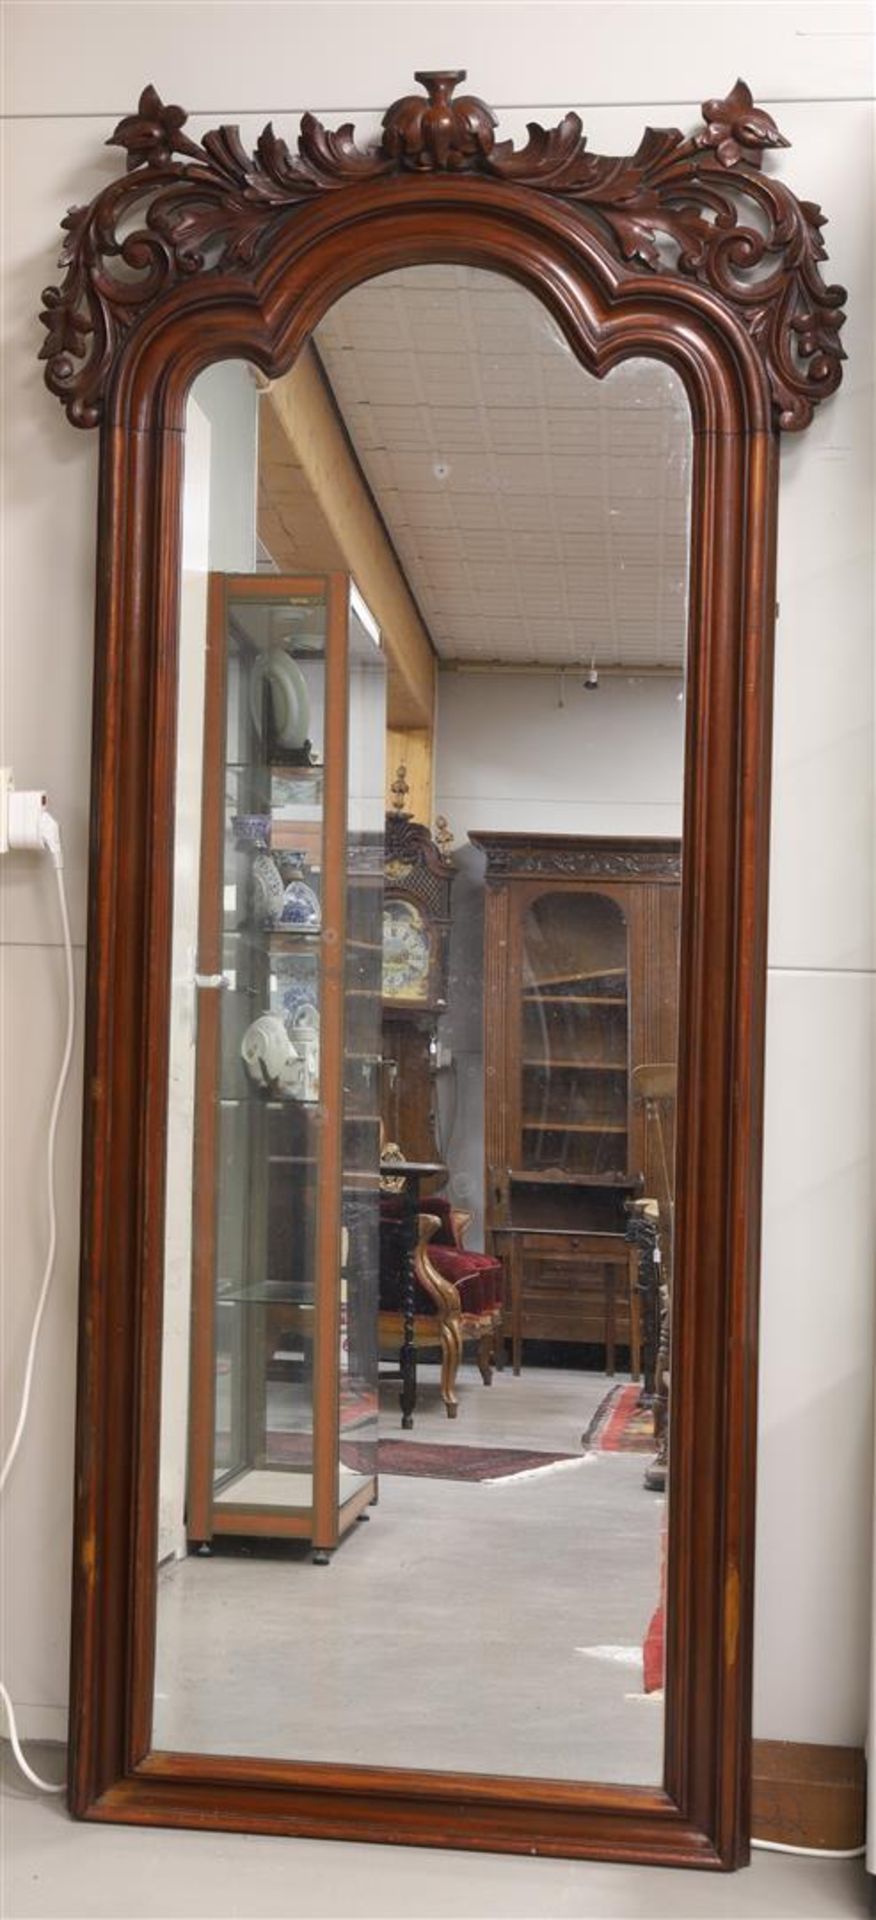 A mirror, Holland, Willem III, 2nd half 19th century. Mahogany, double curved at the top and